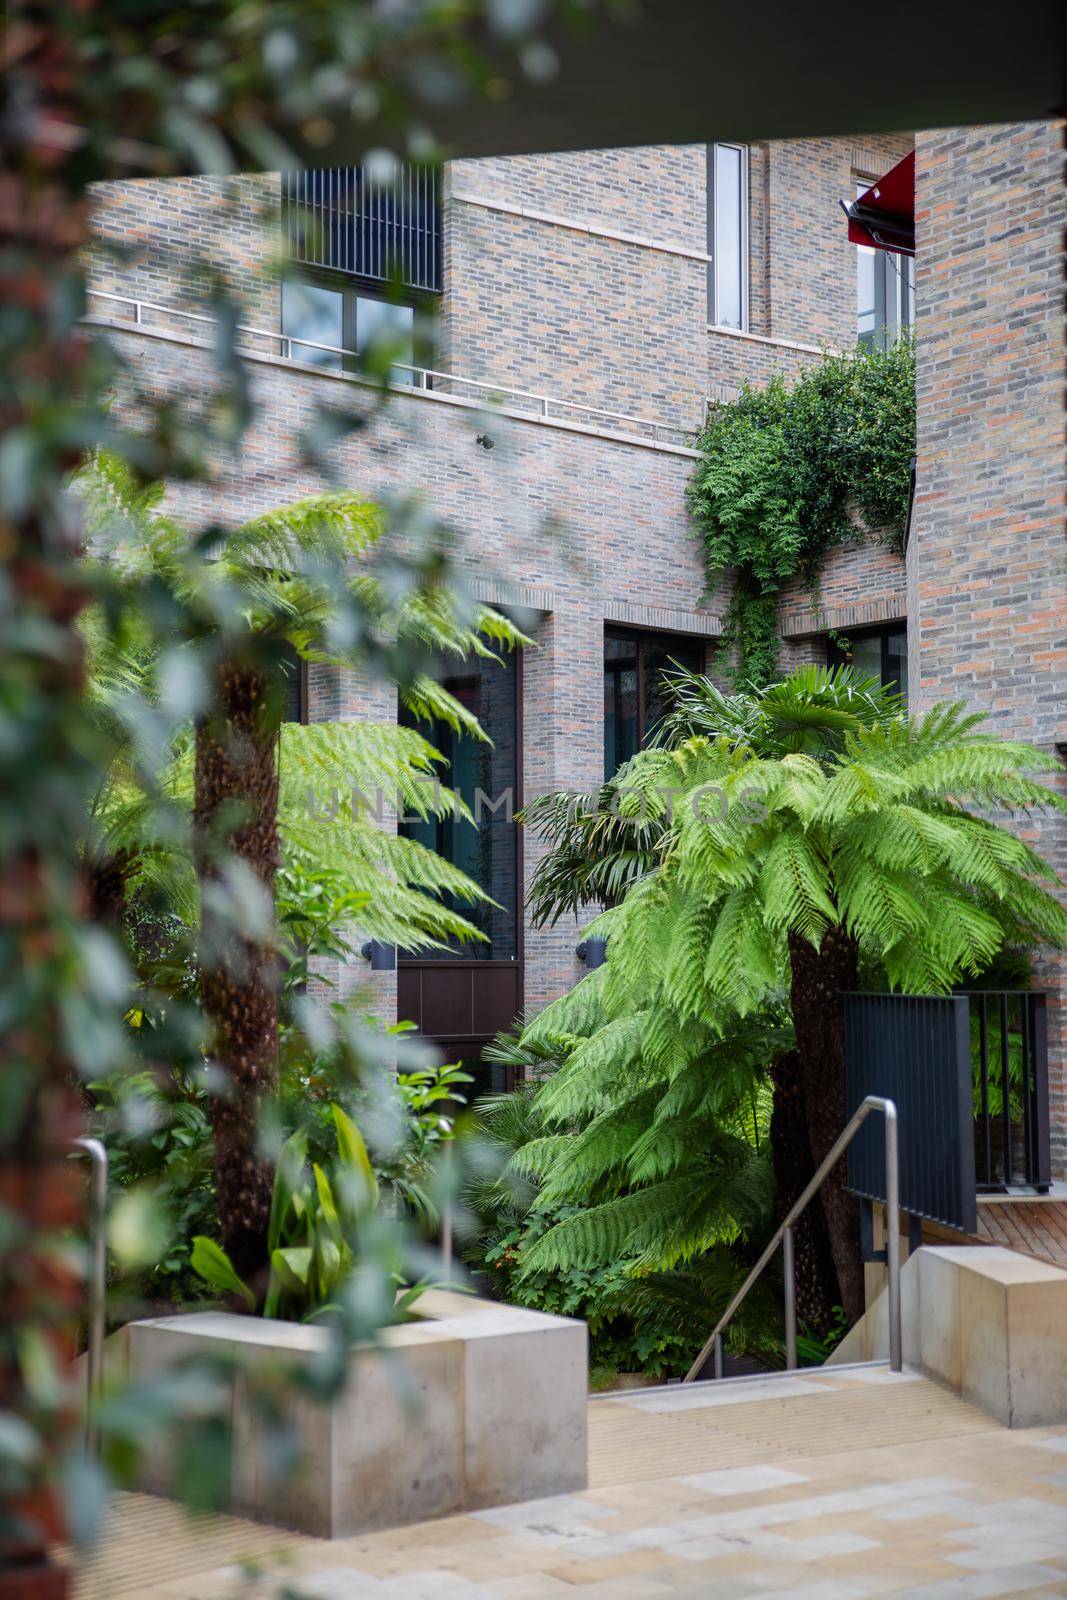 Plants and small palm trees down the stairs and at the entrance of gray building. Door of building with modern architecture surrounded by nature. Houseplants in the city